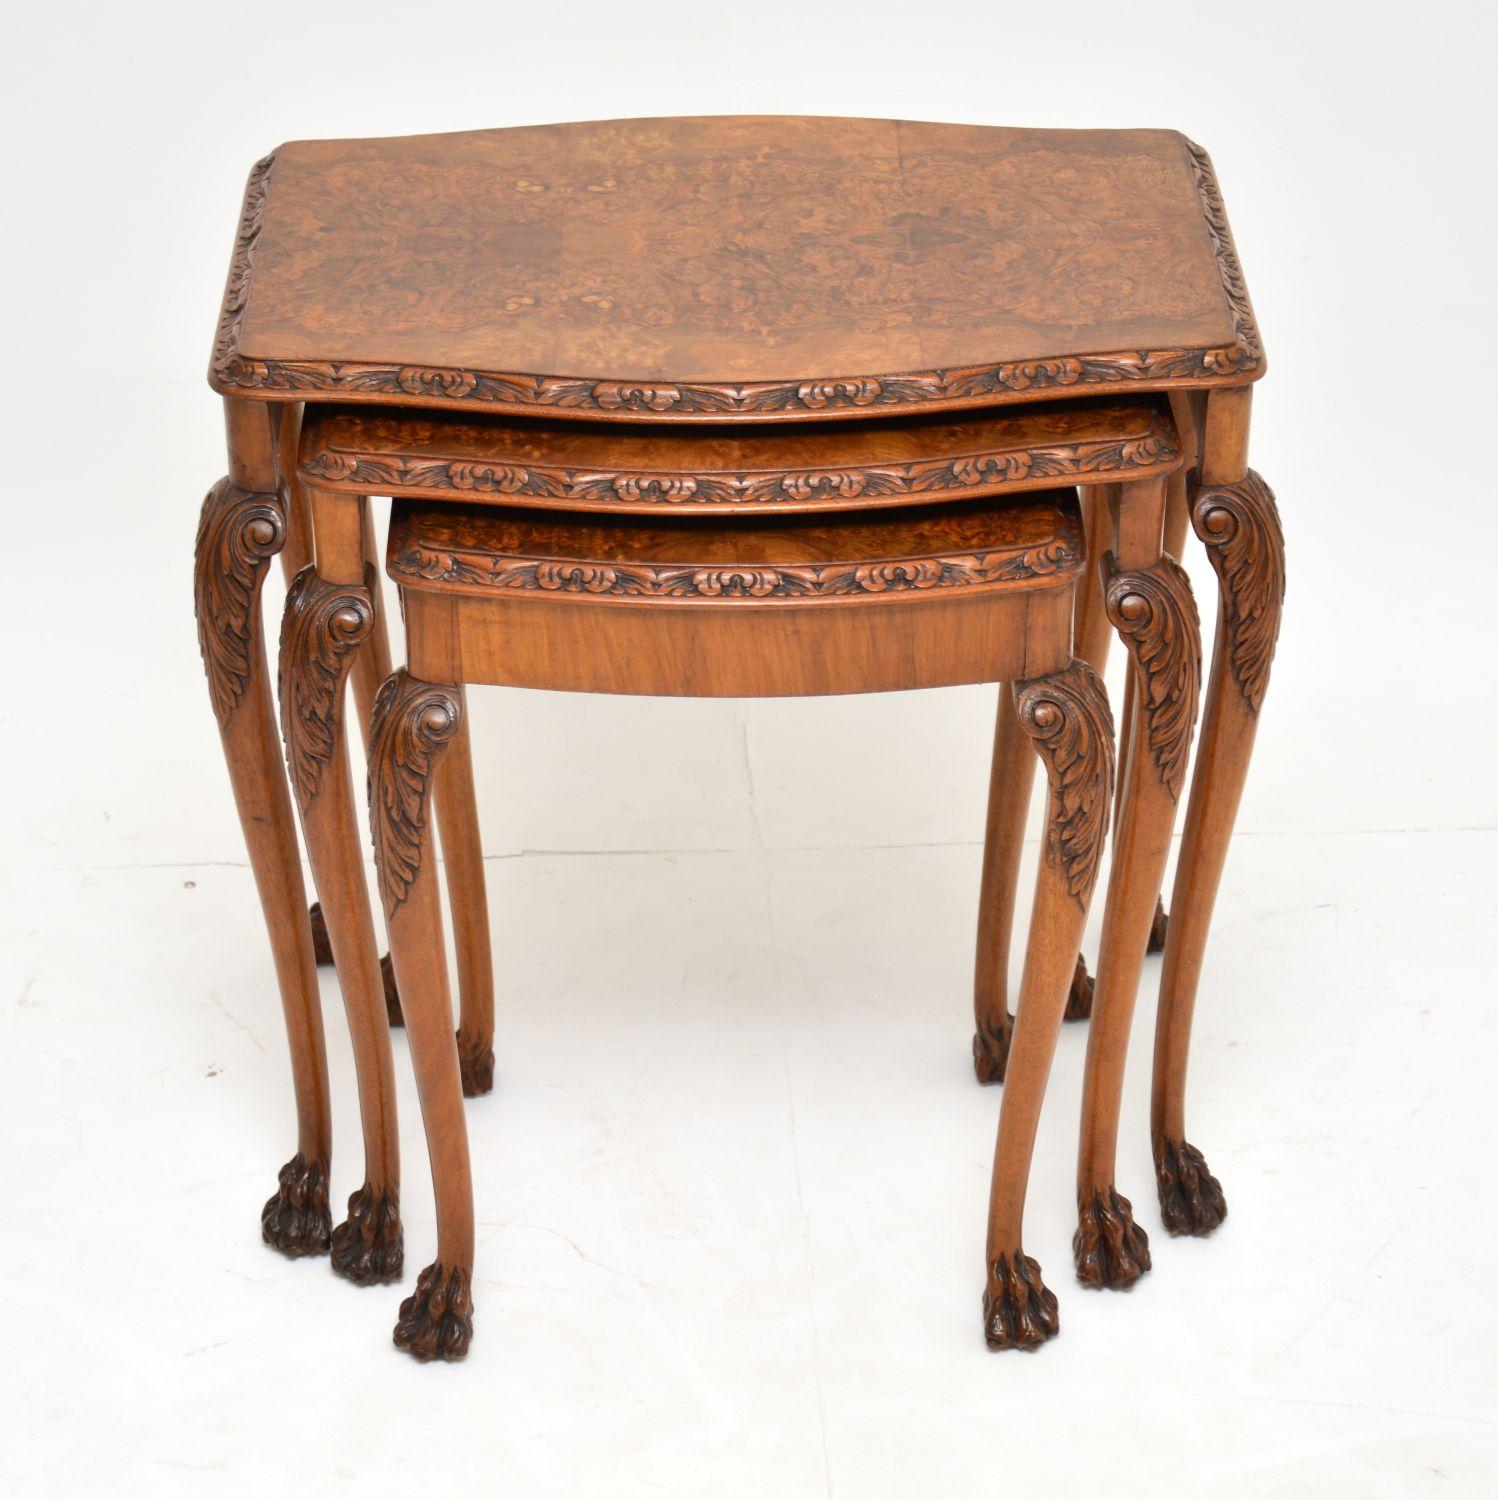 This antique Queen Anne style walnut nest of three tables is very good quality, in good condition & dates from around the 1930’s period.

The shaped table tops are a tight burr walnut, with fine carvings around the edges. There are more fine